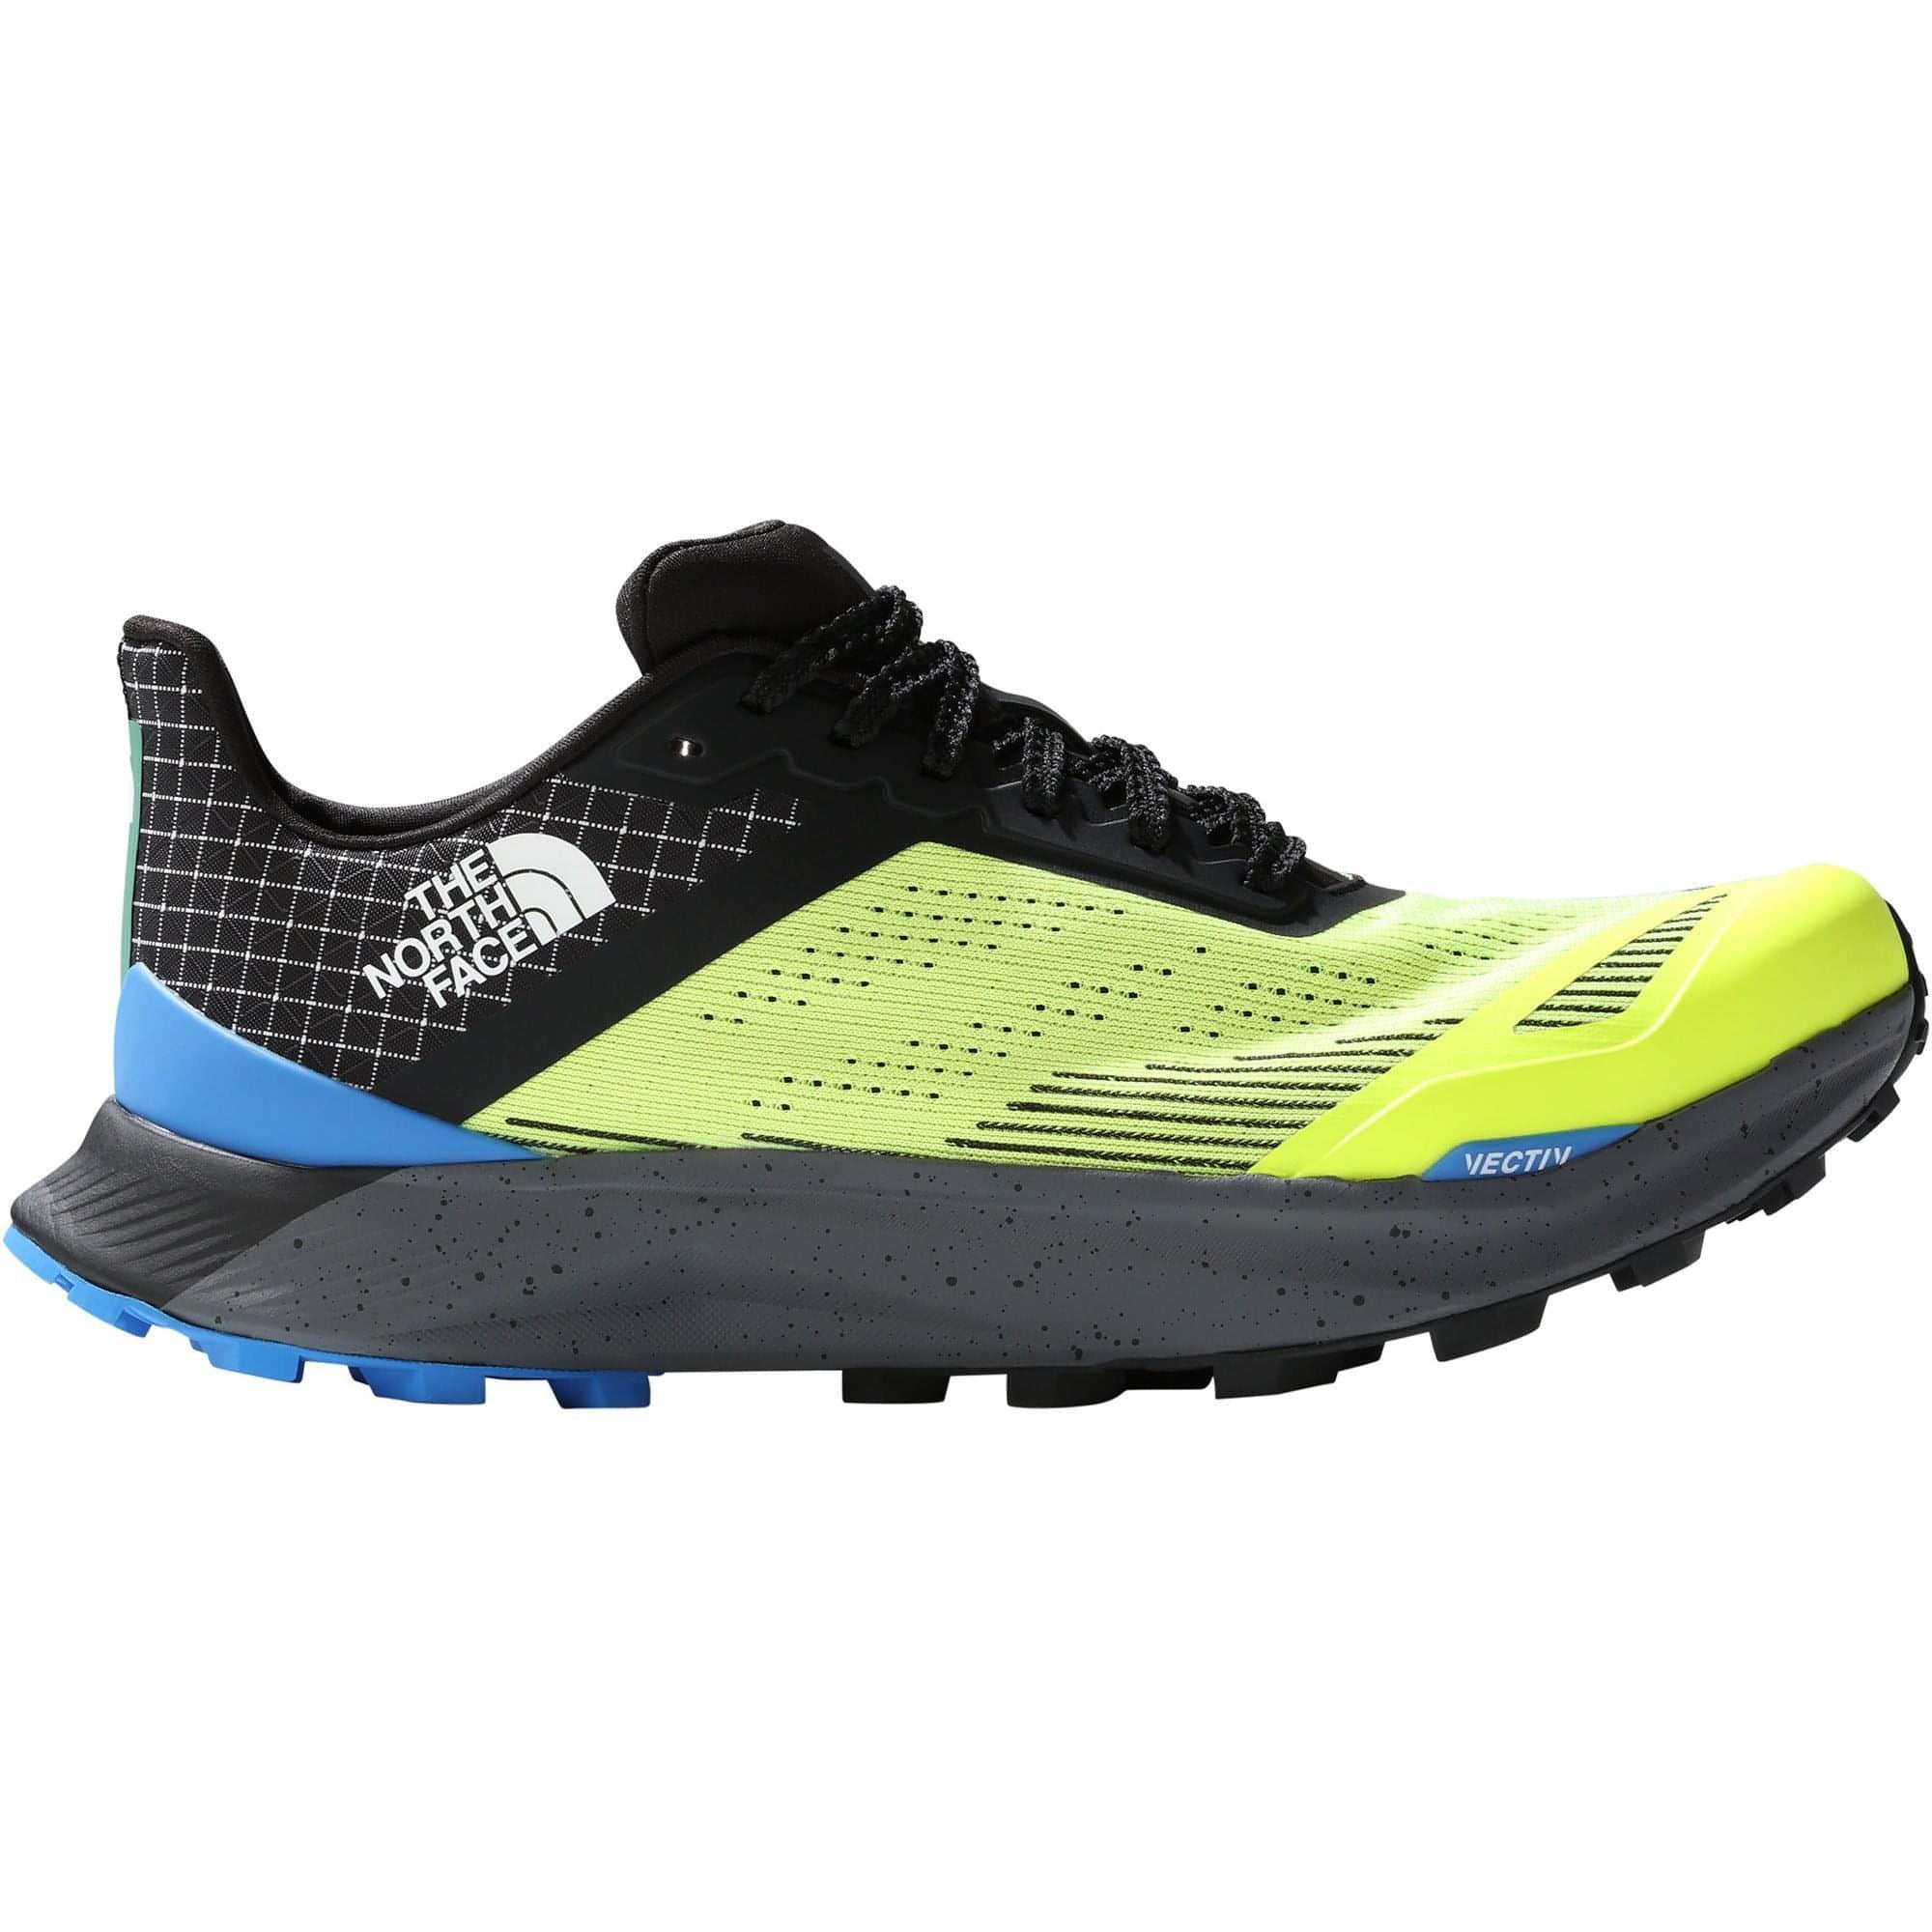 The North Face Vectiv Infinite II Mens Trail Running Shoes - Yellow ...